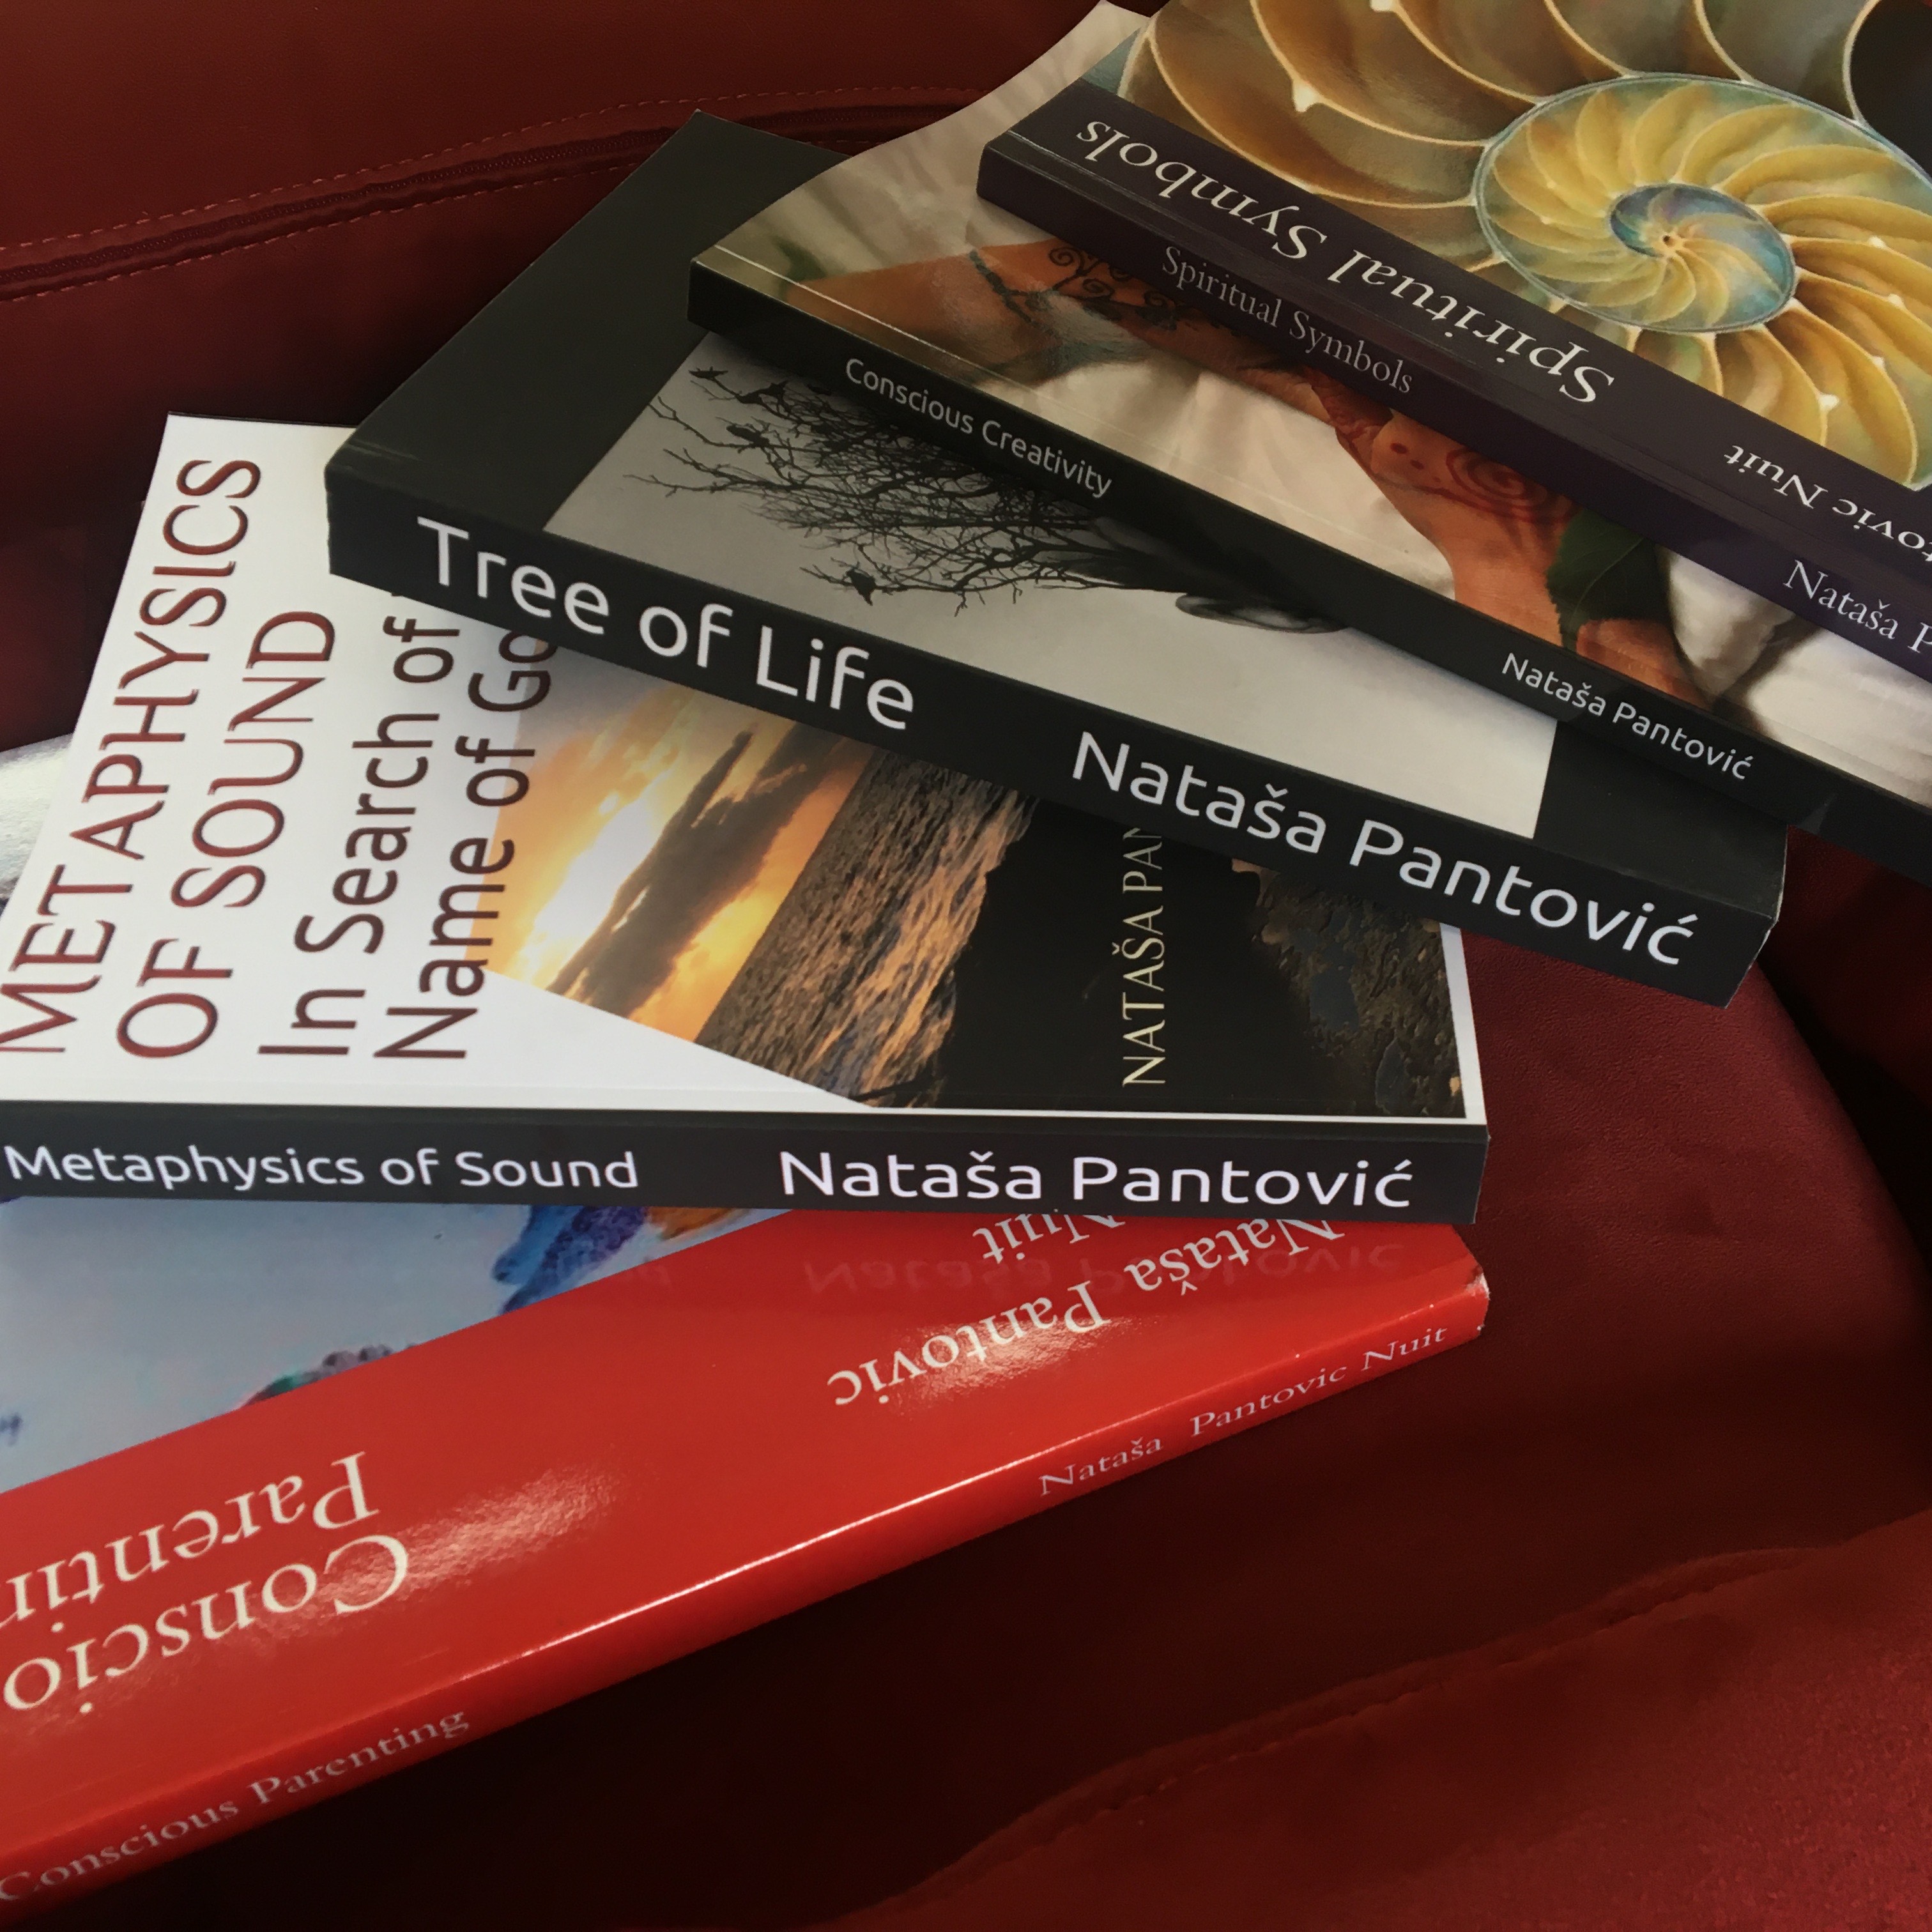 03 AoL Mindfullness Books Conscious Parenting Course by Natasa Pantovic & Ivana Milosavljevic, Tree of Life by Natasa Pantovic, Conscious Creativity, Spiritual Symbols Metaphysics of Sound in Search of Name of God 2022